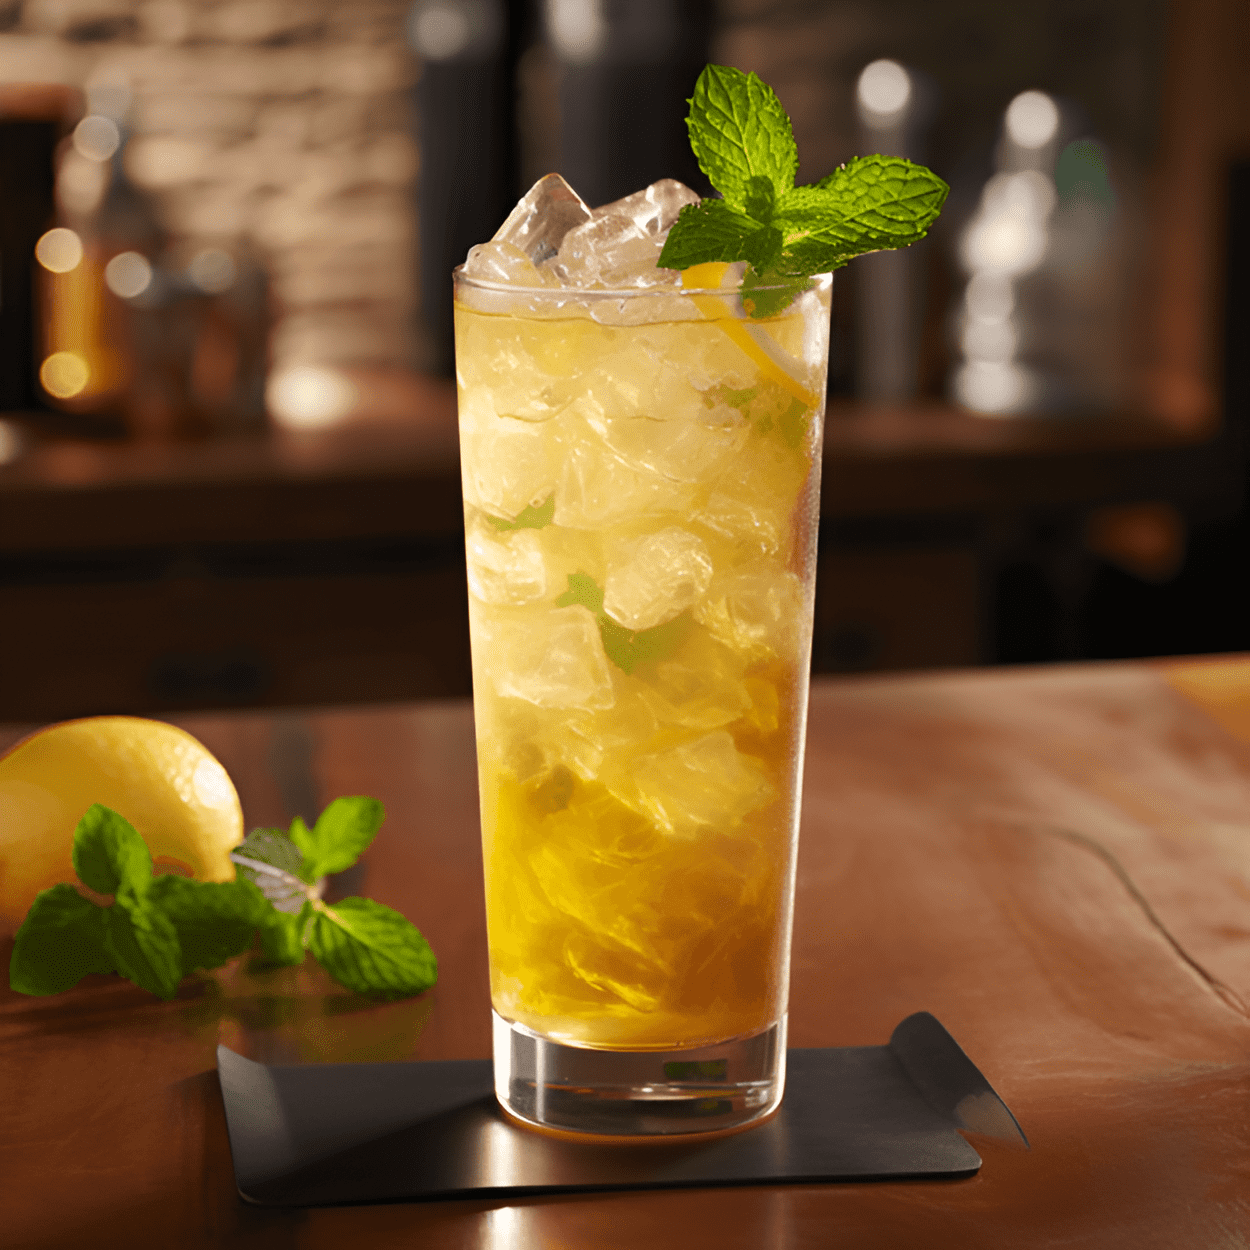 Obama Cocktail Recipe - The Obama Cocktail is a harmonious blend of sweet, sour, and strong. The sweetness of the honey is perfectly balanced by the tartness of the lemon juice, while the bourbon gives it a robust and full-bodied flavor. The hint of mint adds a refreshing touch, making it a delightful drink to savor.